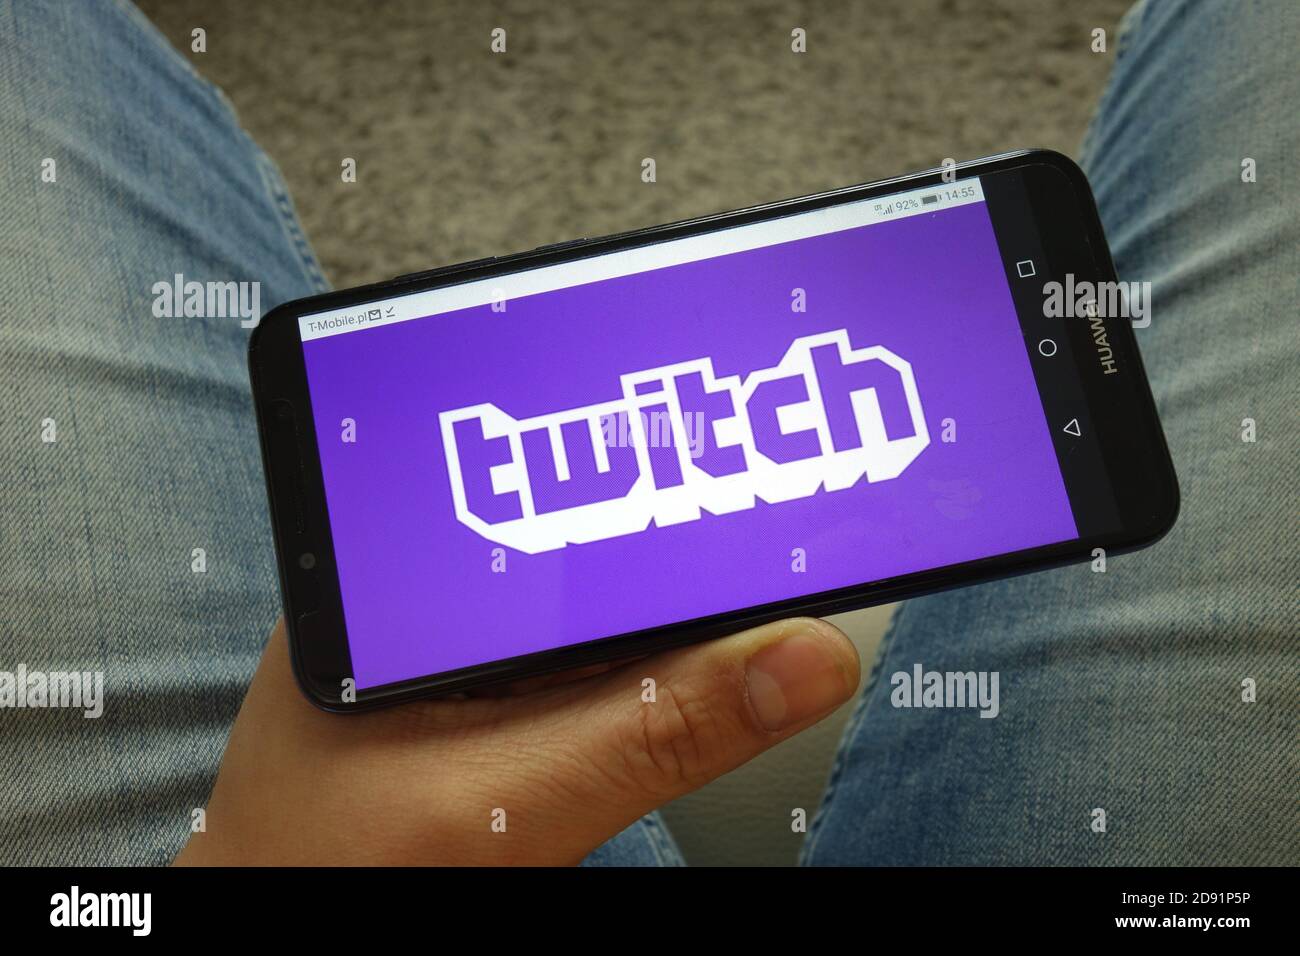 Man holding smartphone with Twitch video live streaming service logo Stock Photo